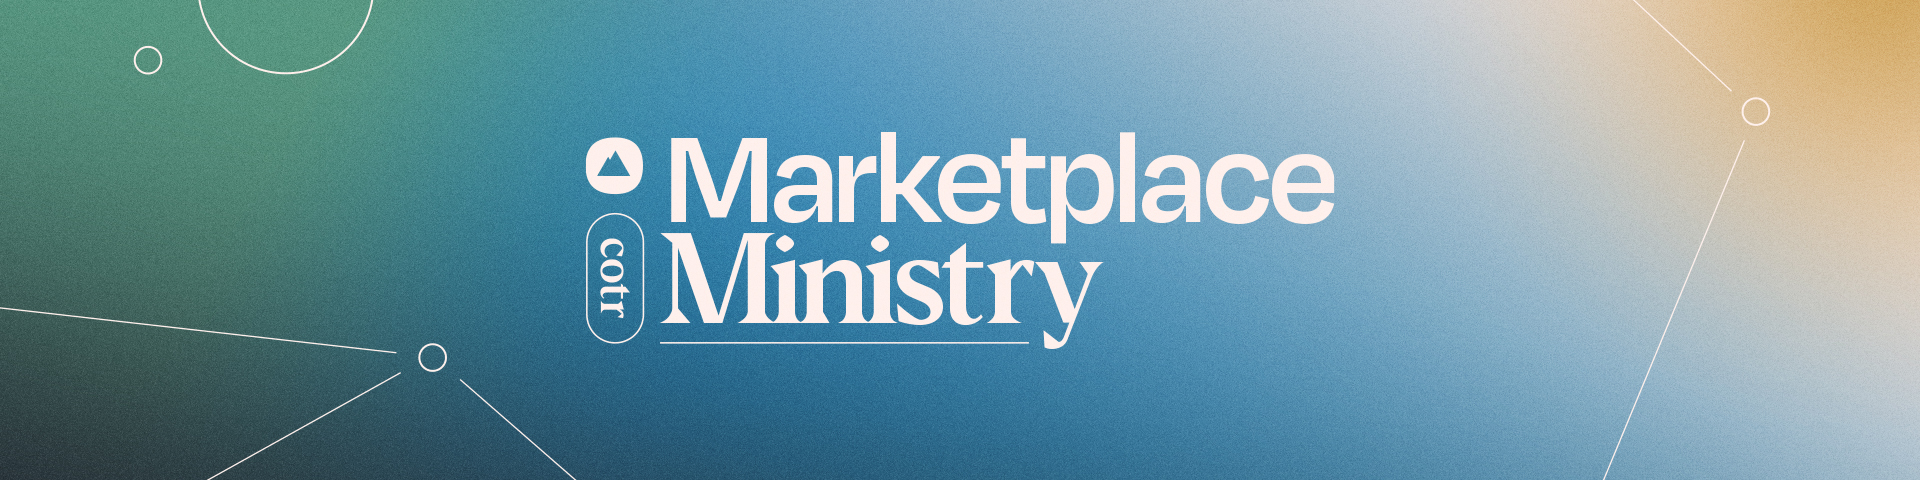 Marketplace_Ministry_Event_Banner_.jpg